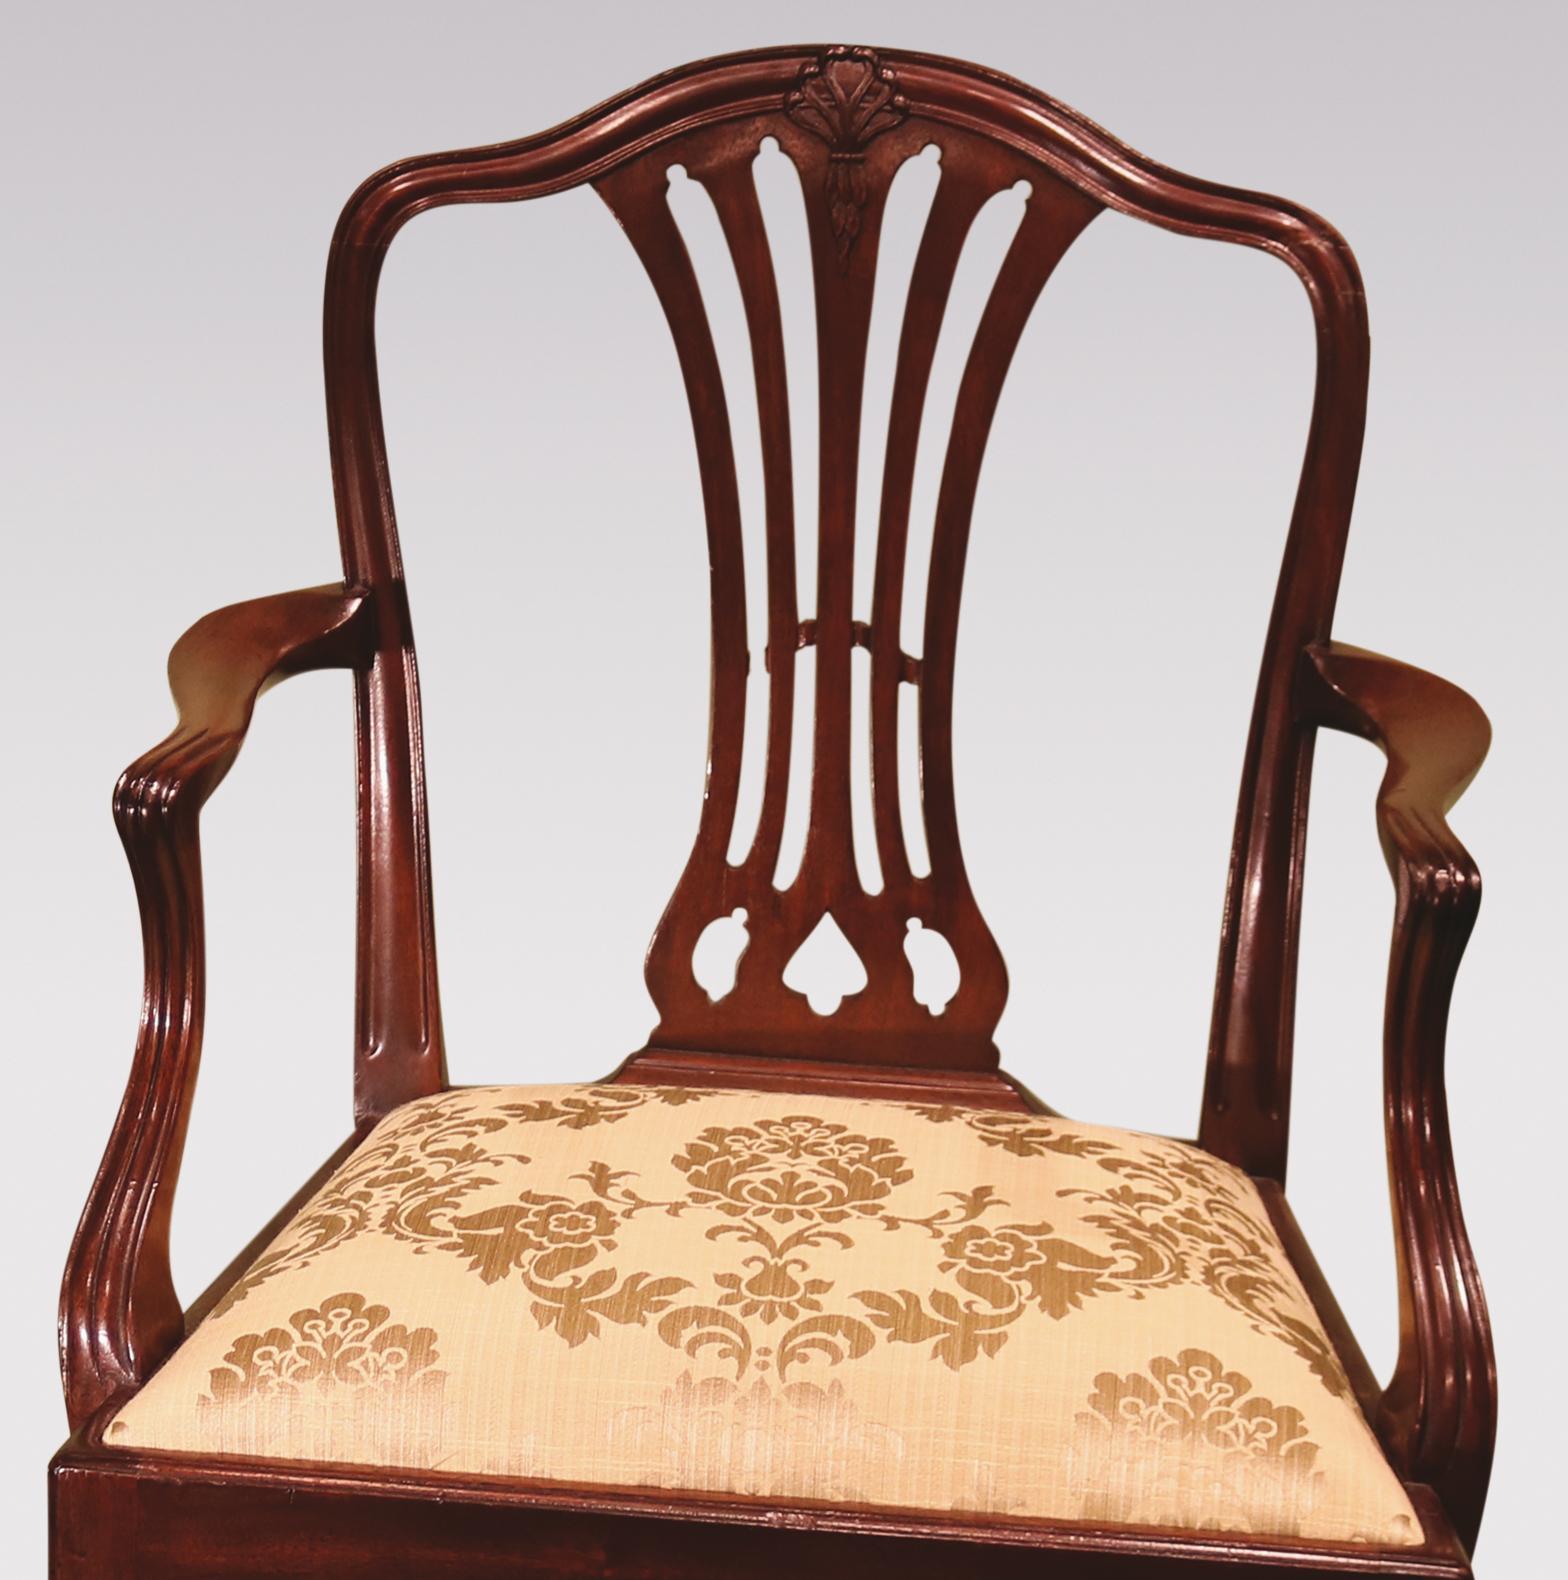 A set of 12 single and 2 arm, late 19th century Hepplewhite style camelback dining chairs, having molded backs with honeysuckle carving to the top rails, with pierced Gothic splats, supported on square top legs with 'H-stretchers'.

Armchairs